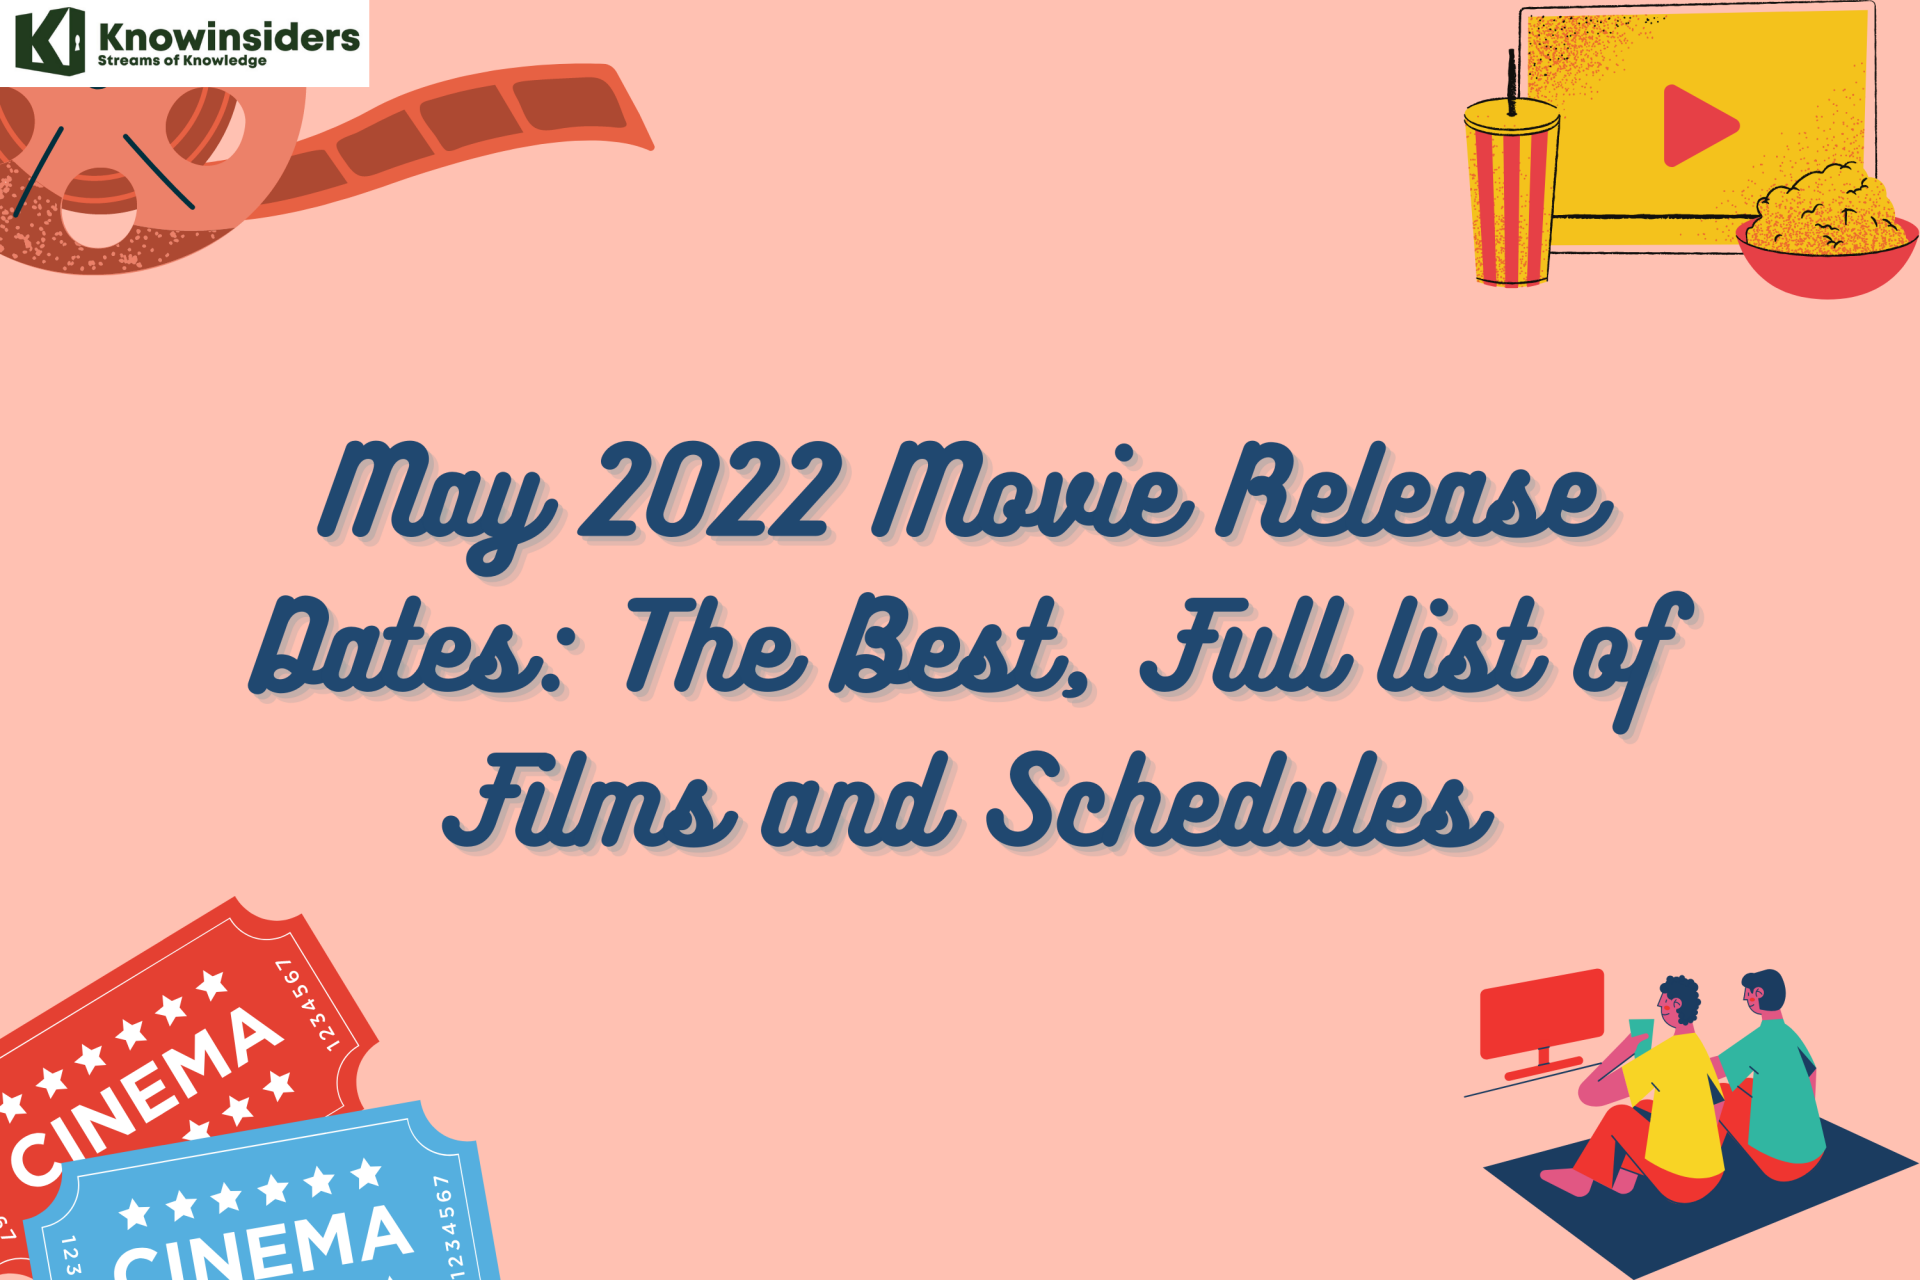 May 2022 Movie Release Dates: The Best, Full list of Films and Schedules in USA